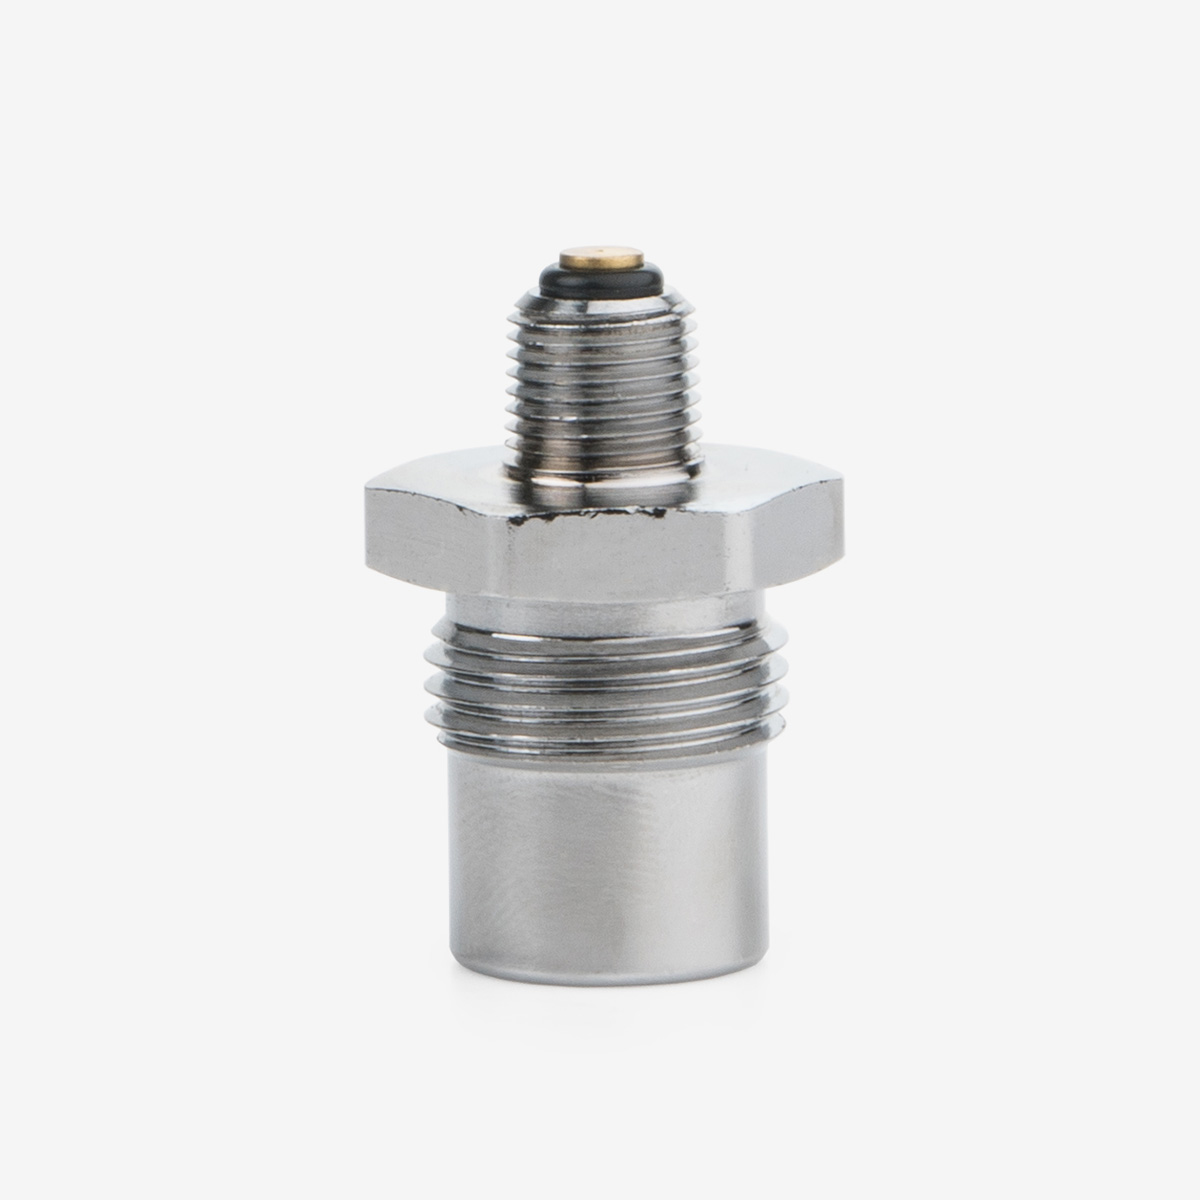 Silver One-Way Check Valve DISS air fitting on white background